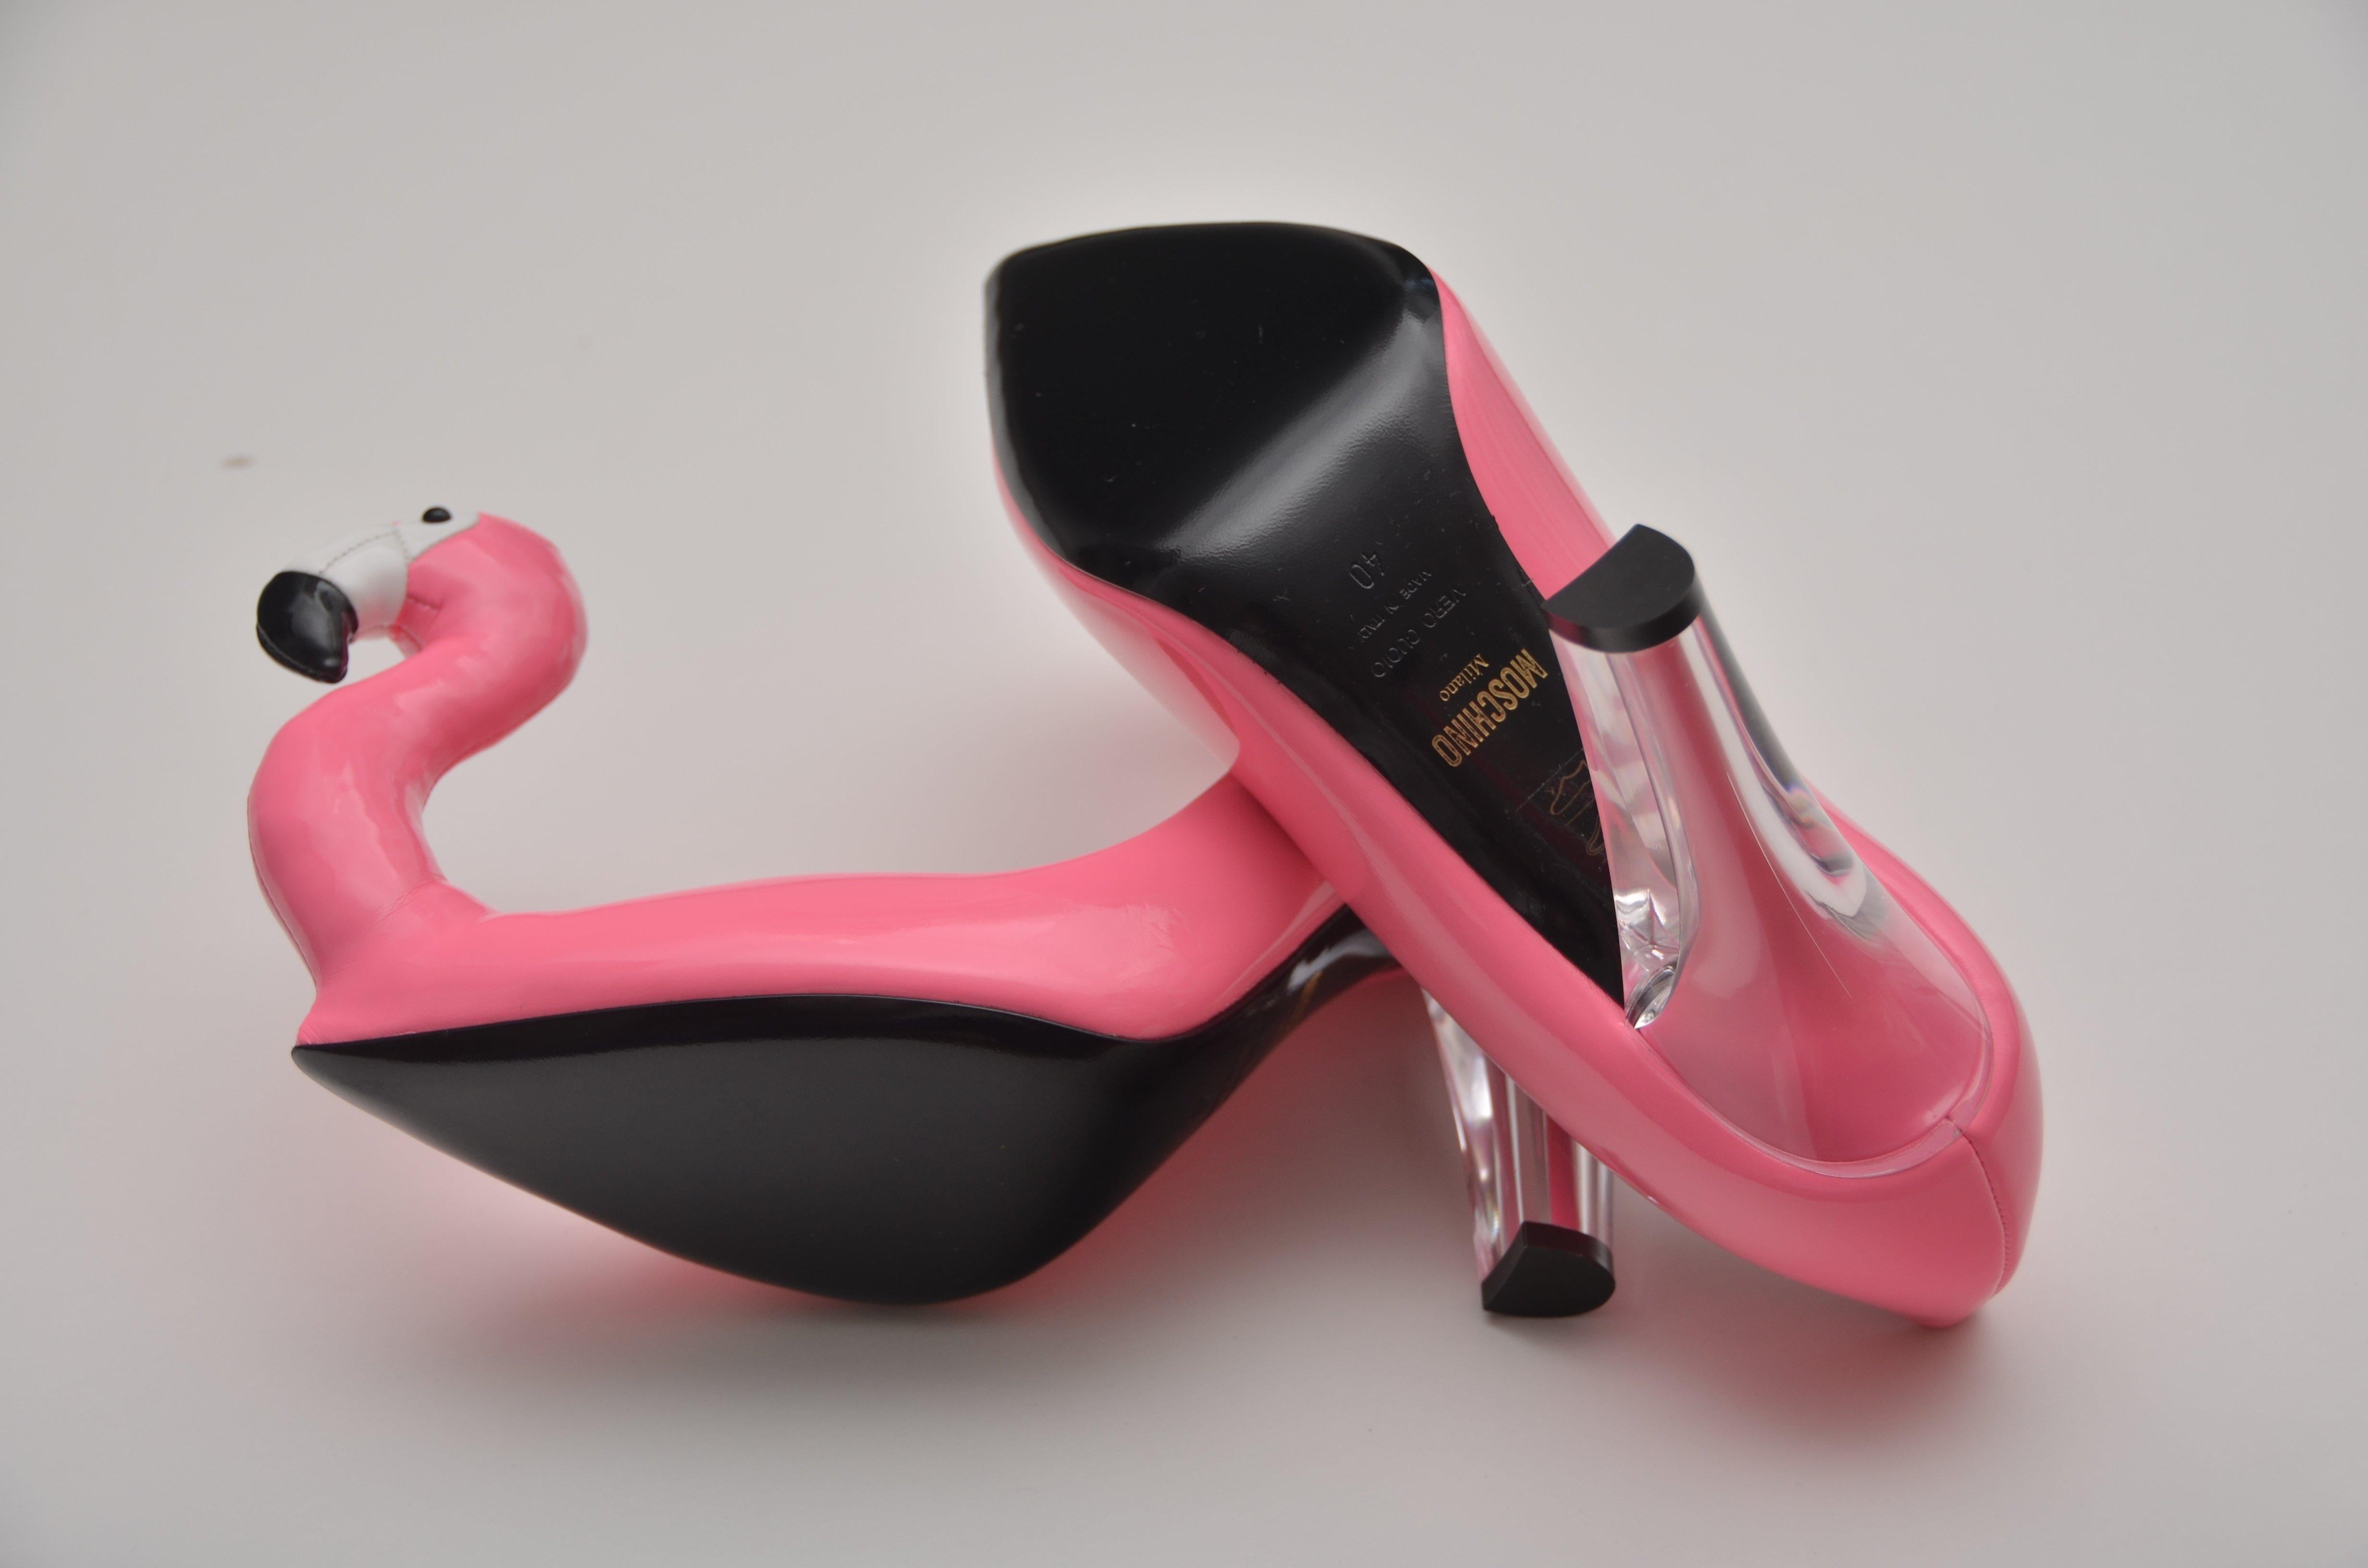 Women's Moschino  Runway Jeremy Scott  Pink Inflatable Flamingo Shoes  Size 40   NEW  For Sale